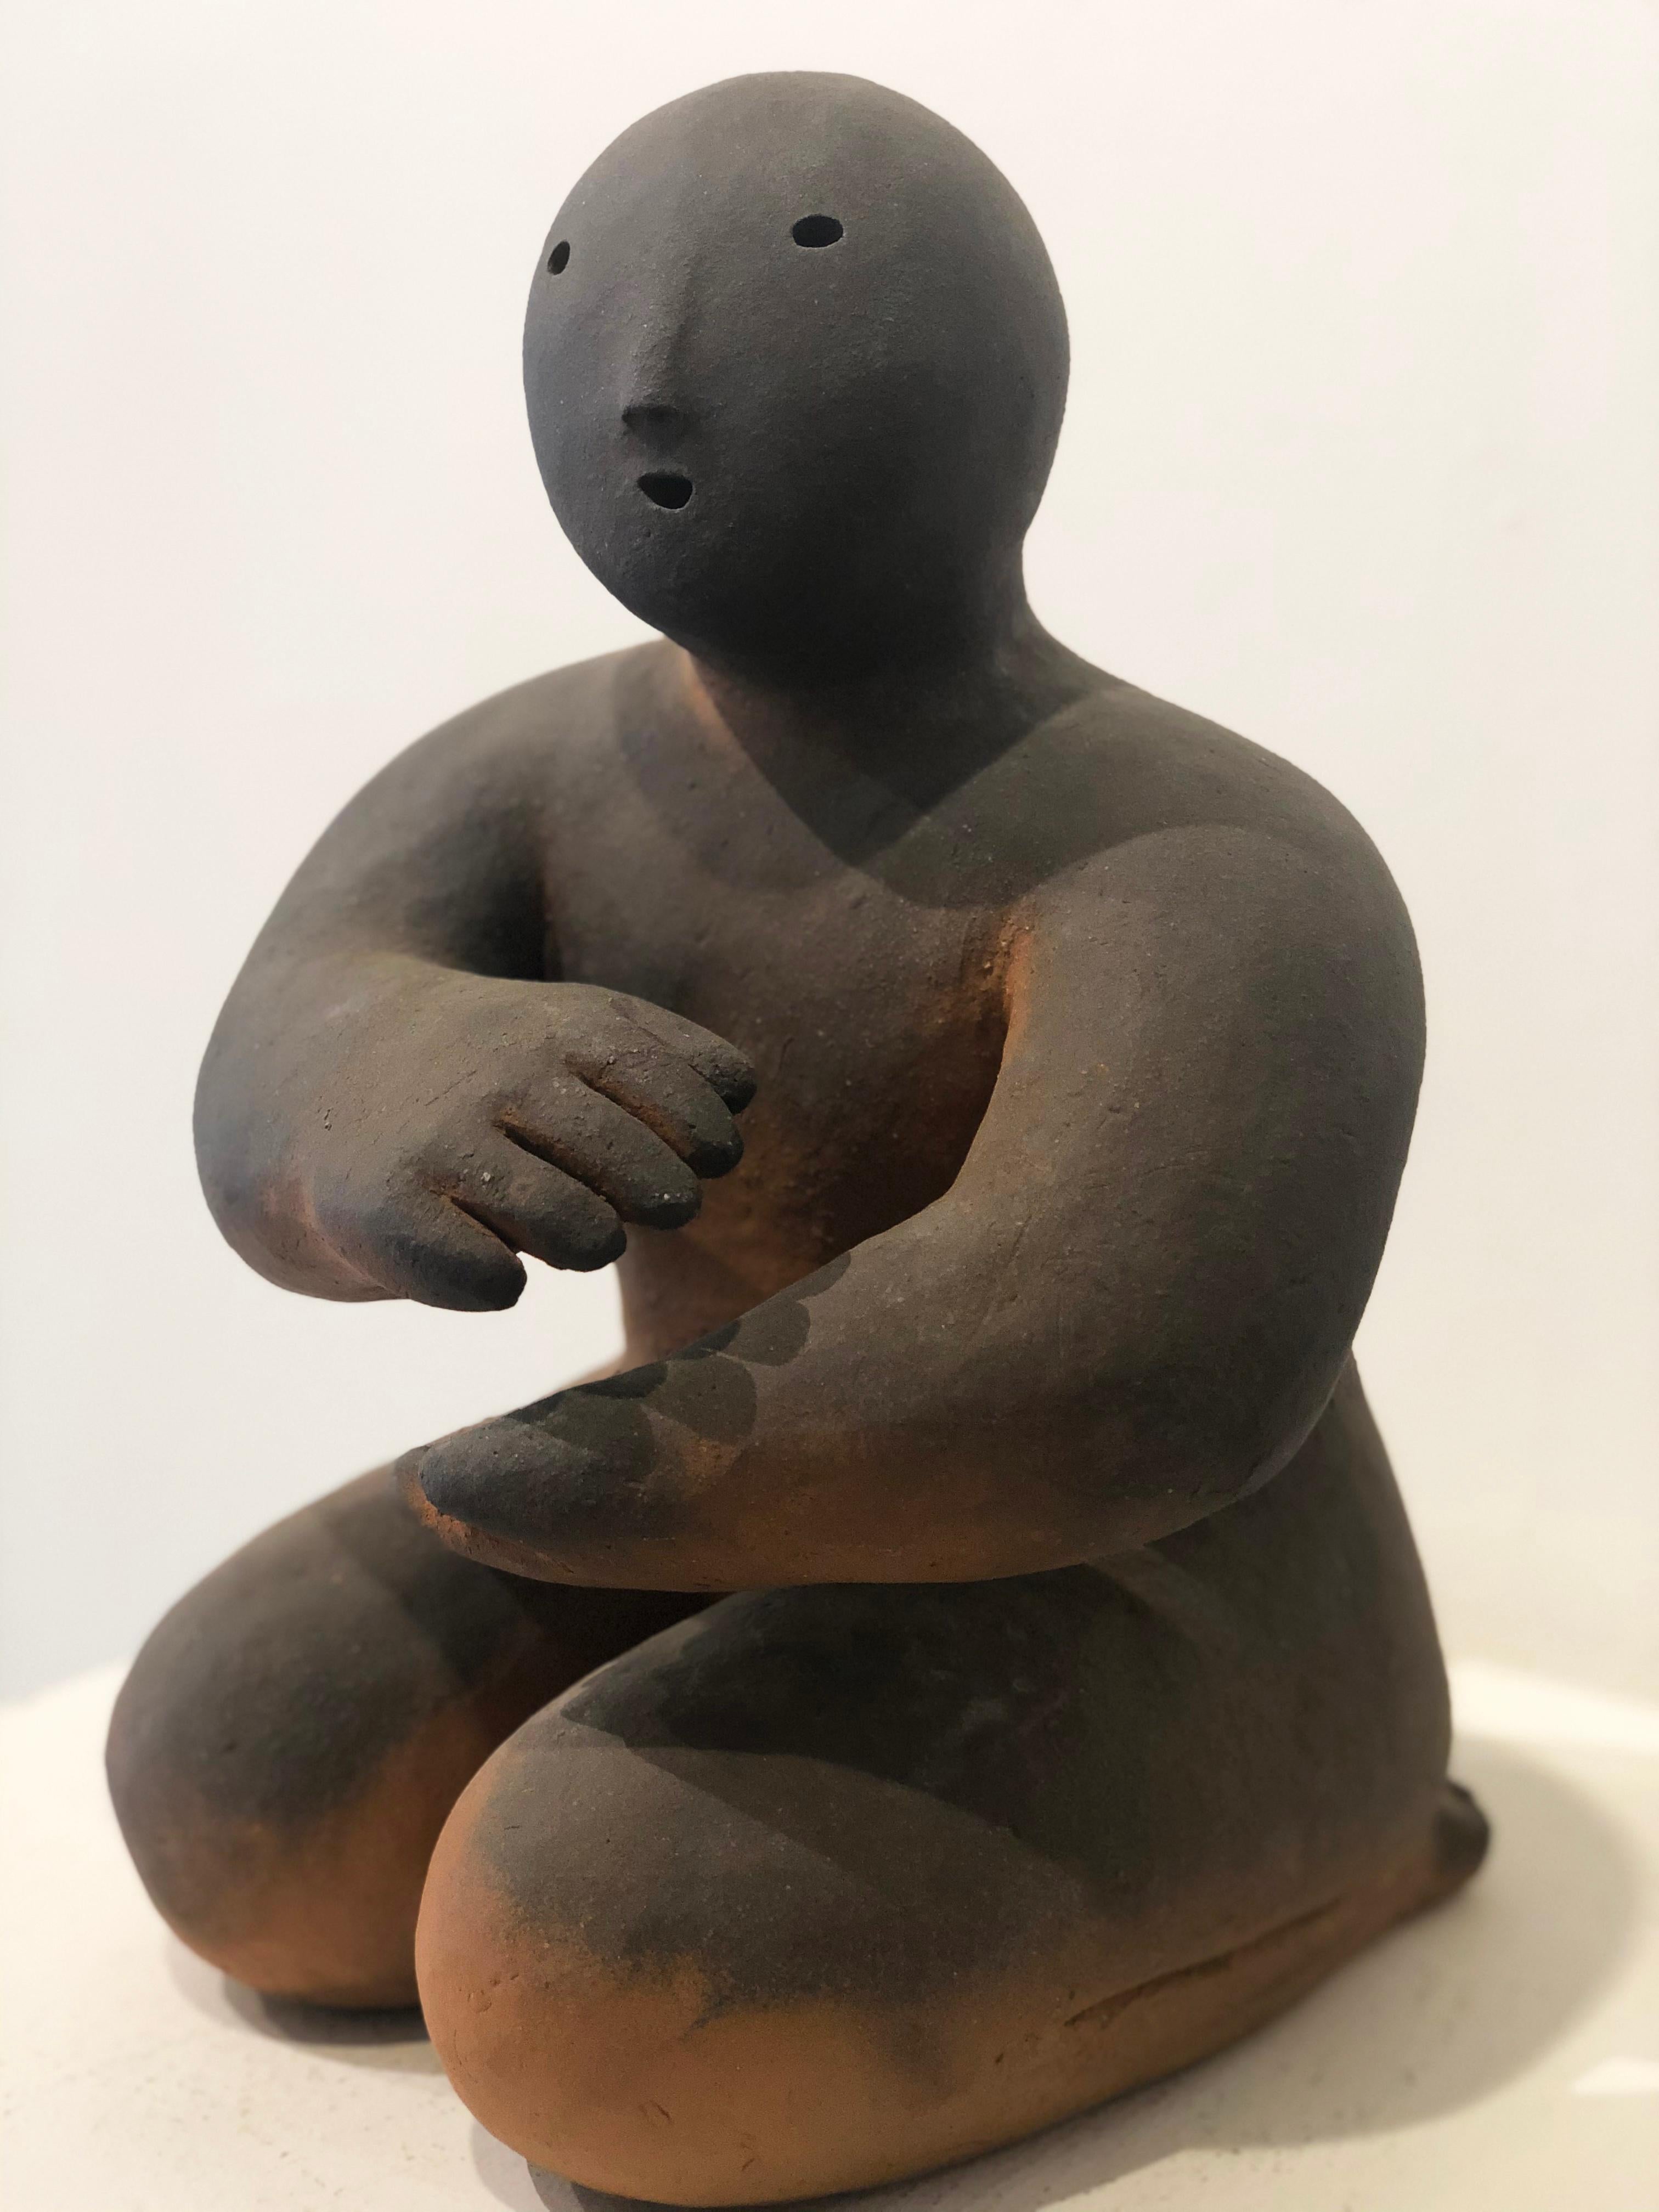 'Holding Energy' 2018 by Connecticut artist, Joy Brown. Wood fired stoneware, 14.5 x 10.5 x 10.5 in. Influenced by Japanese aesthetics and using their traditional pottery methods, Brown creates child-like, anthropomorphous figurative sculptures in